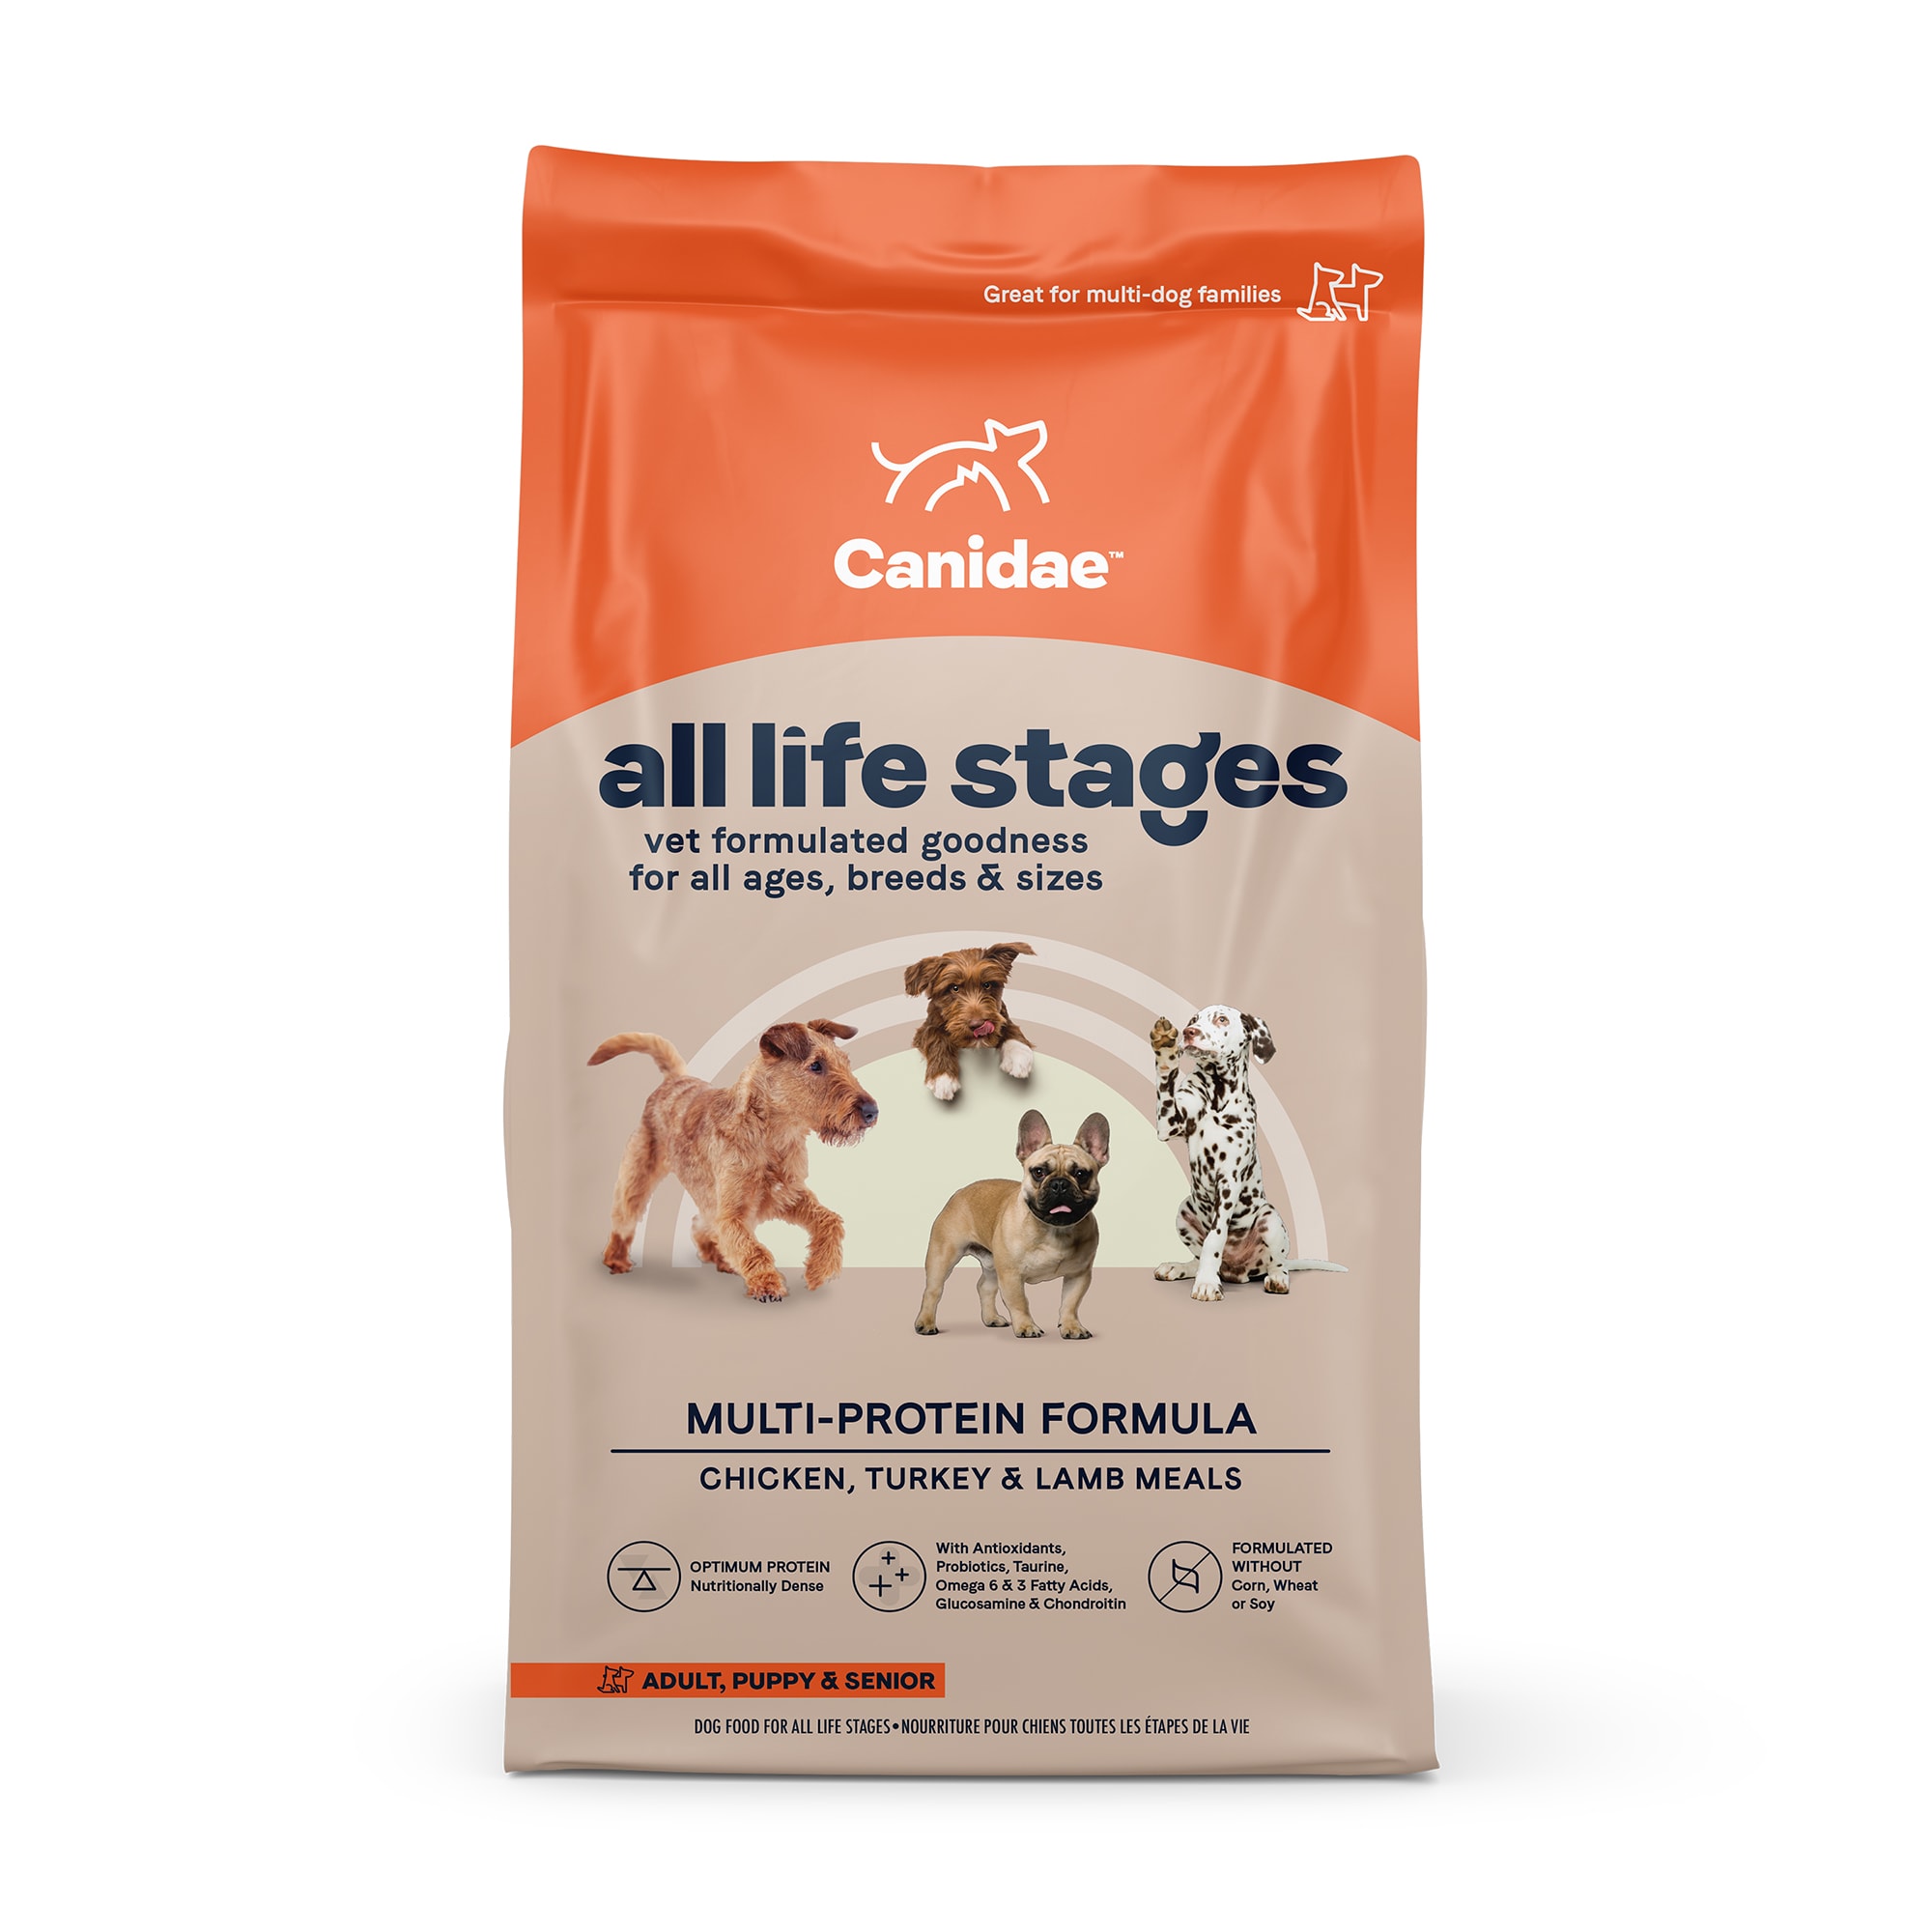 Canidae All Life Stages Chicken, Turkey, Lamb & Fish Meals Formula Dry Dog Food, 15 lbs.